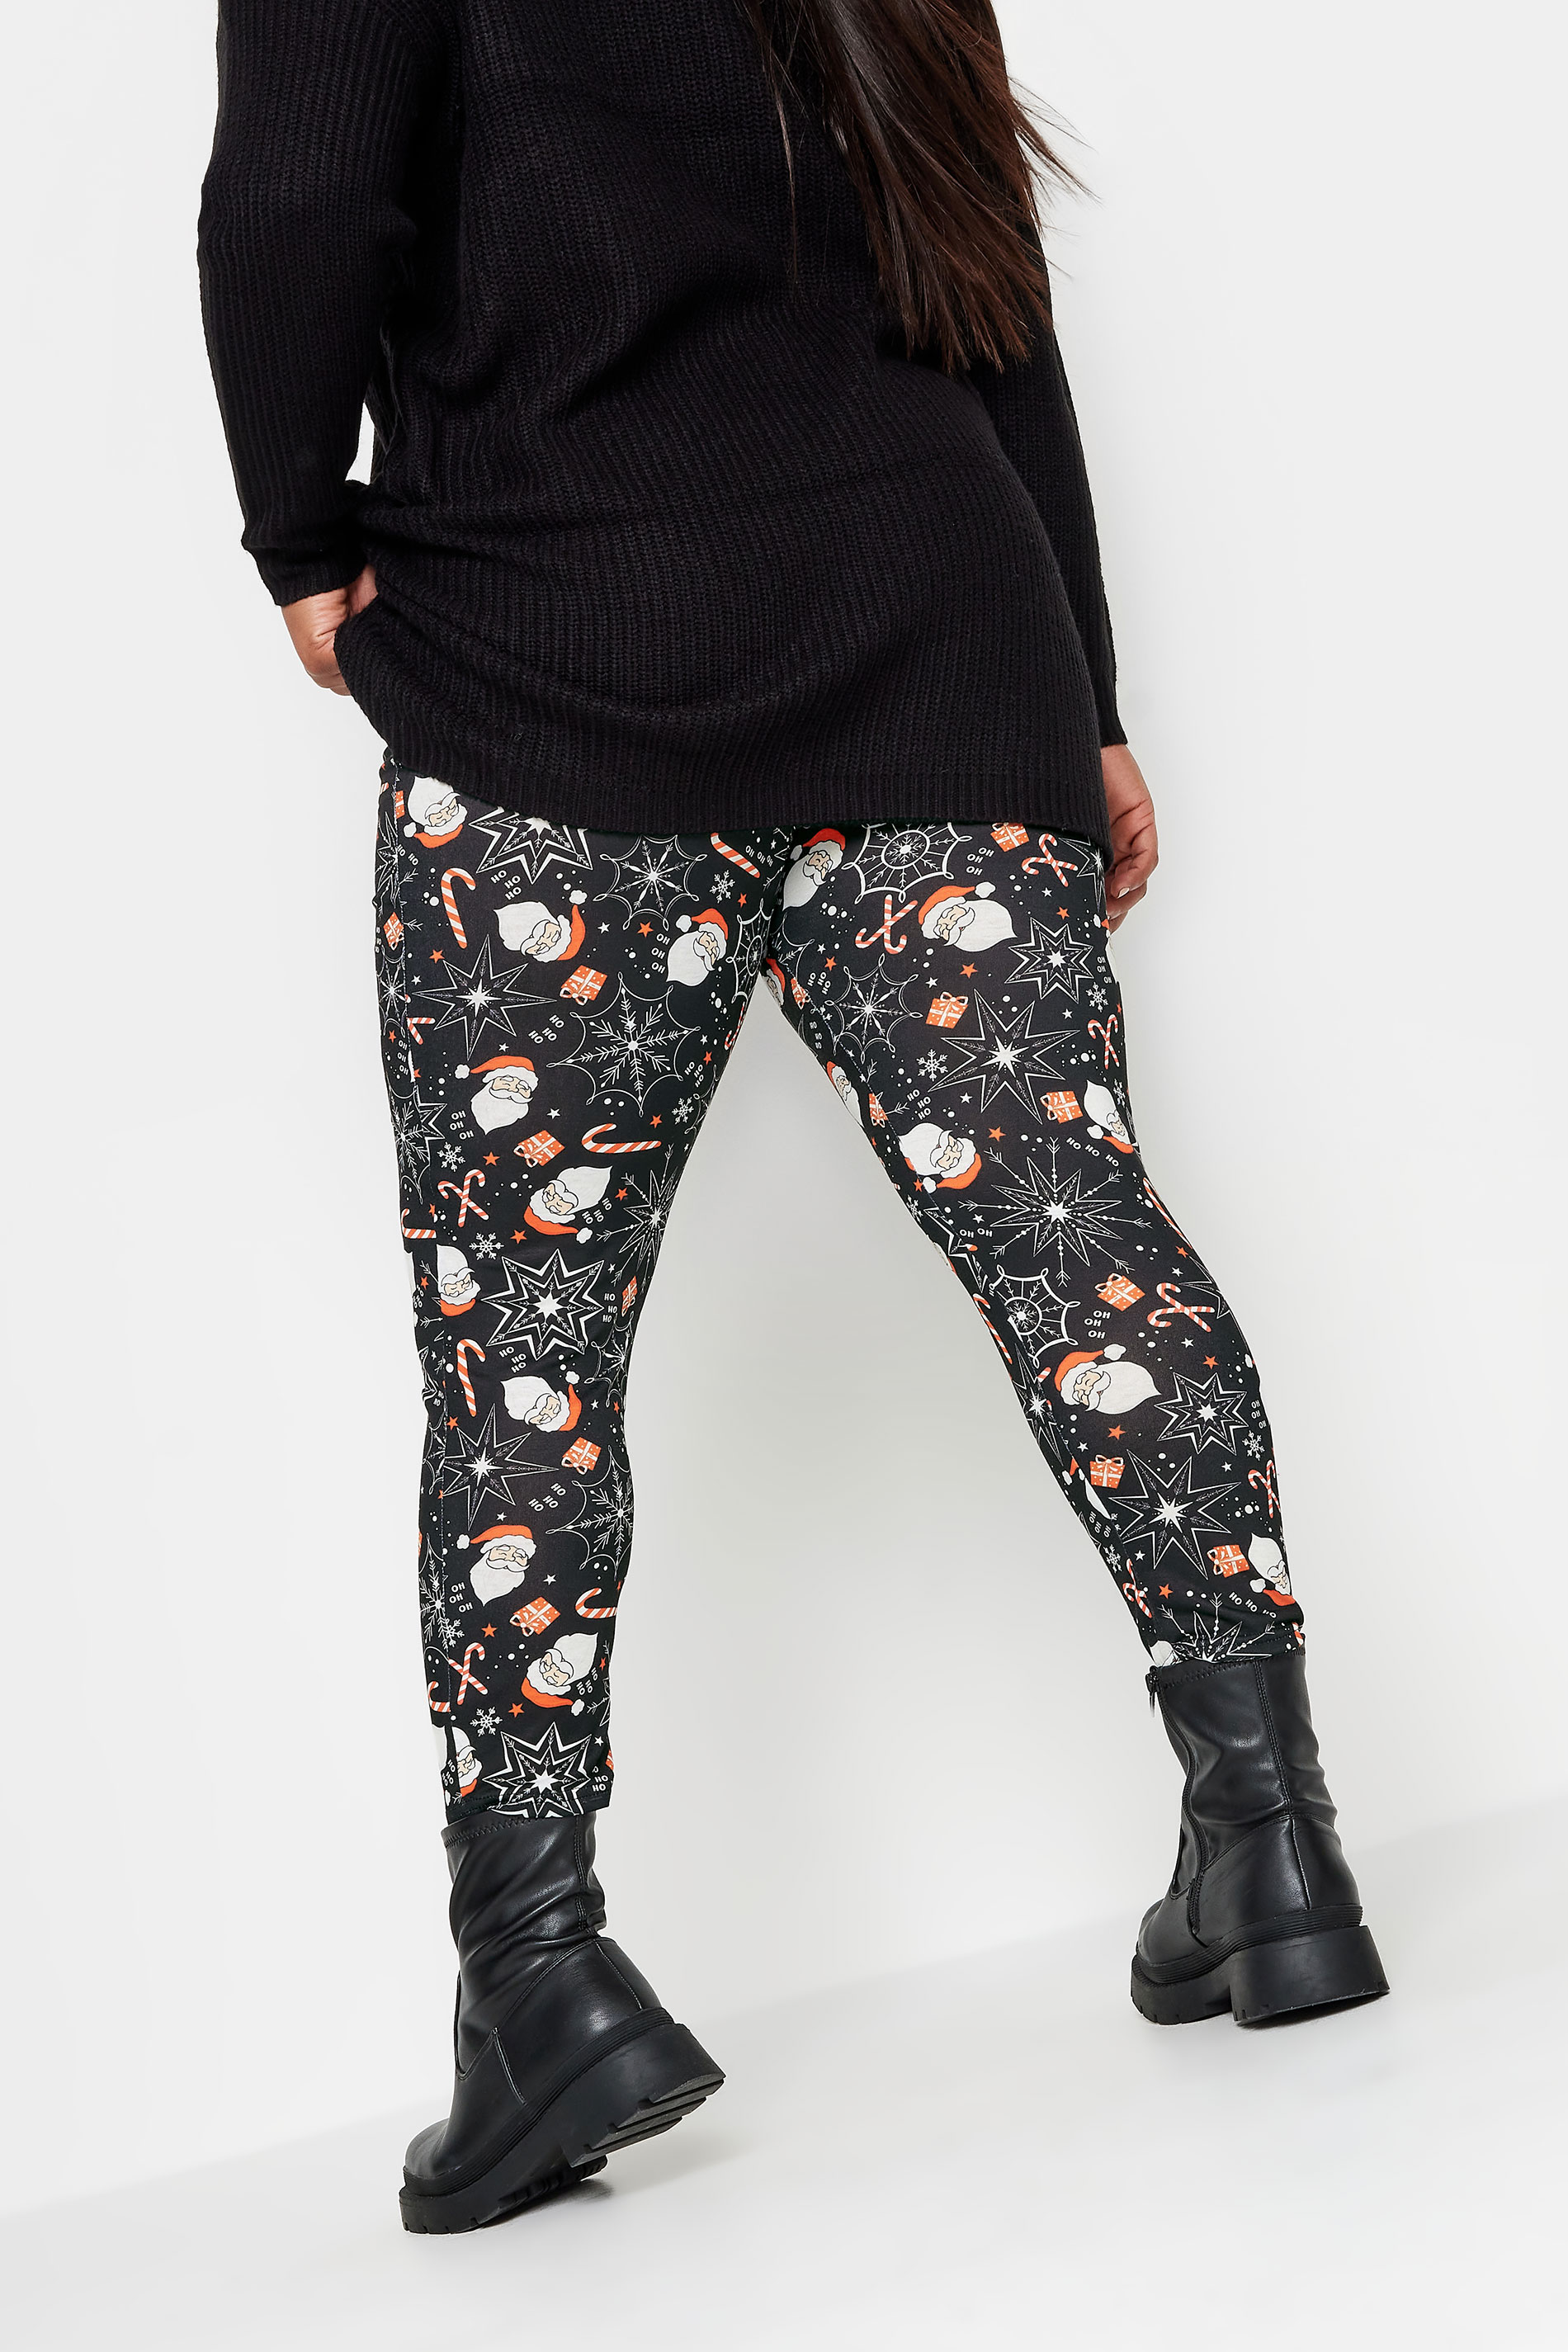 YOURS Plus Size Black Christmas Print Leggings | Yours Clothing 3